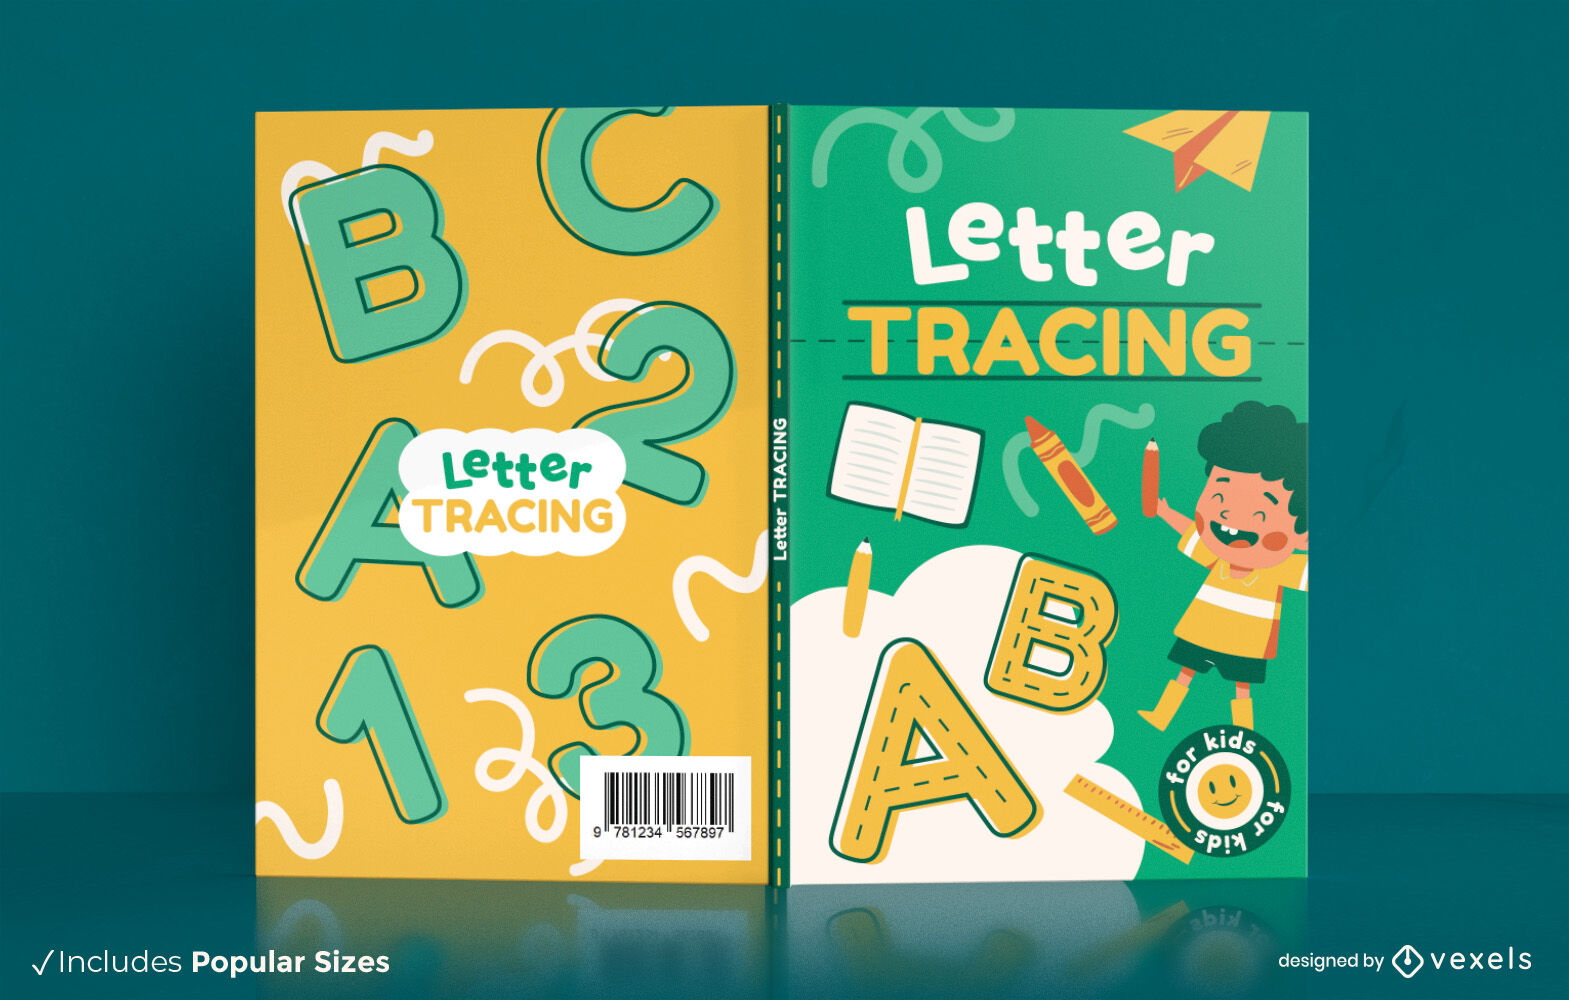 Letter tracing book cover design